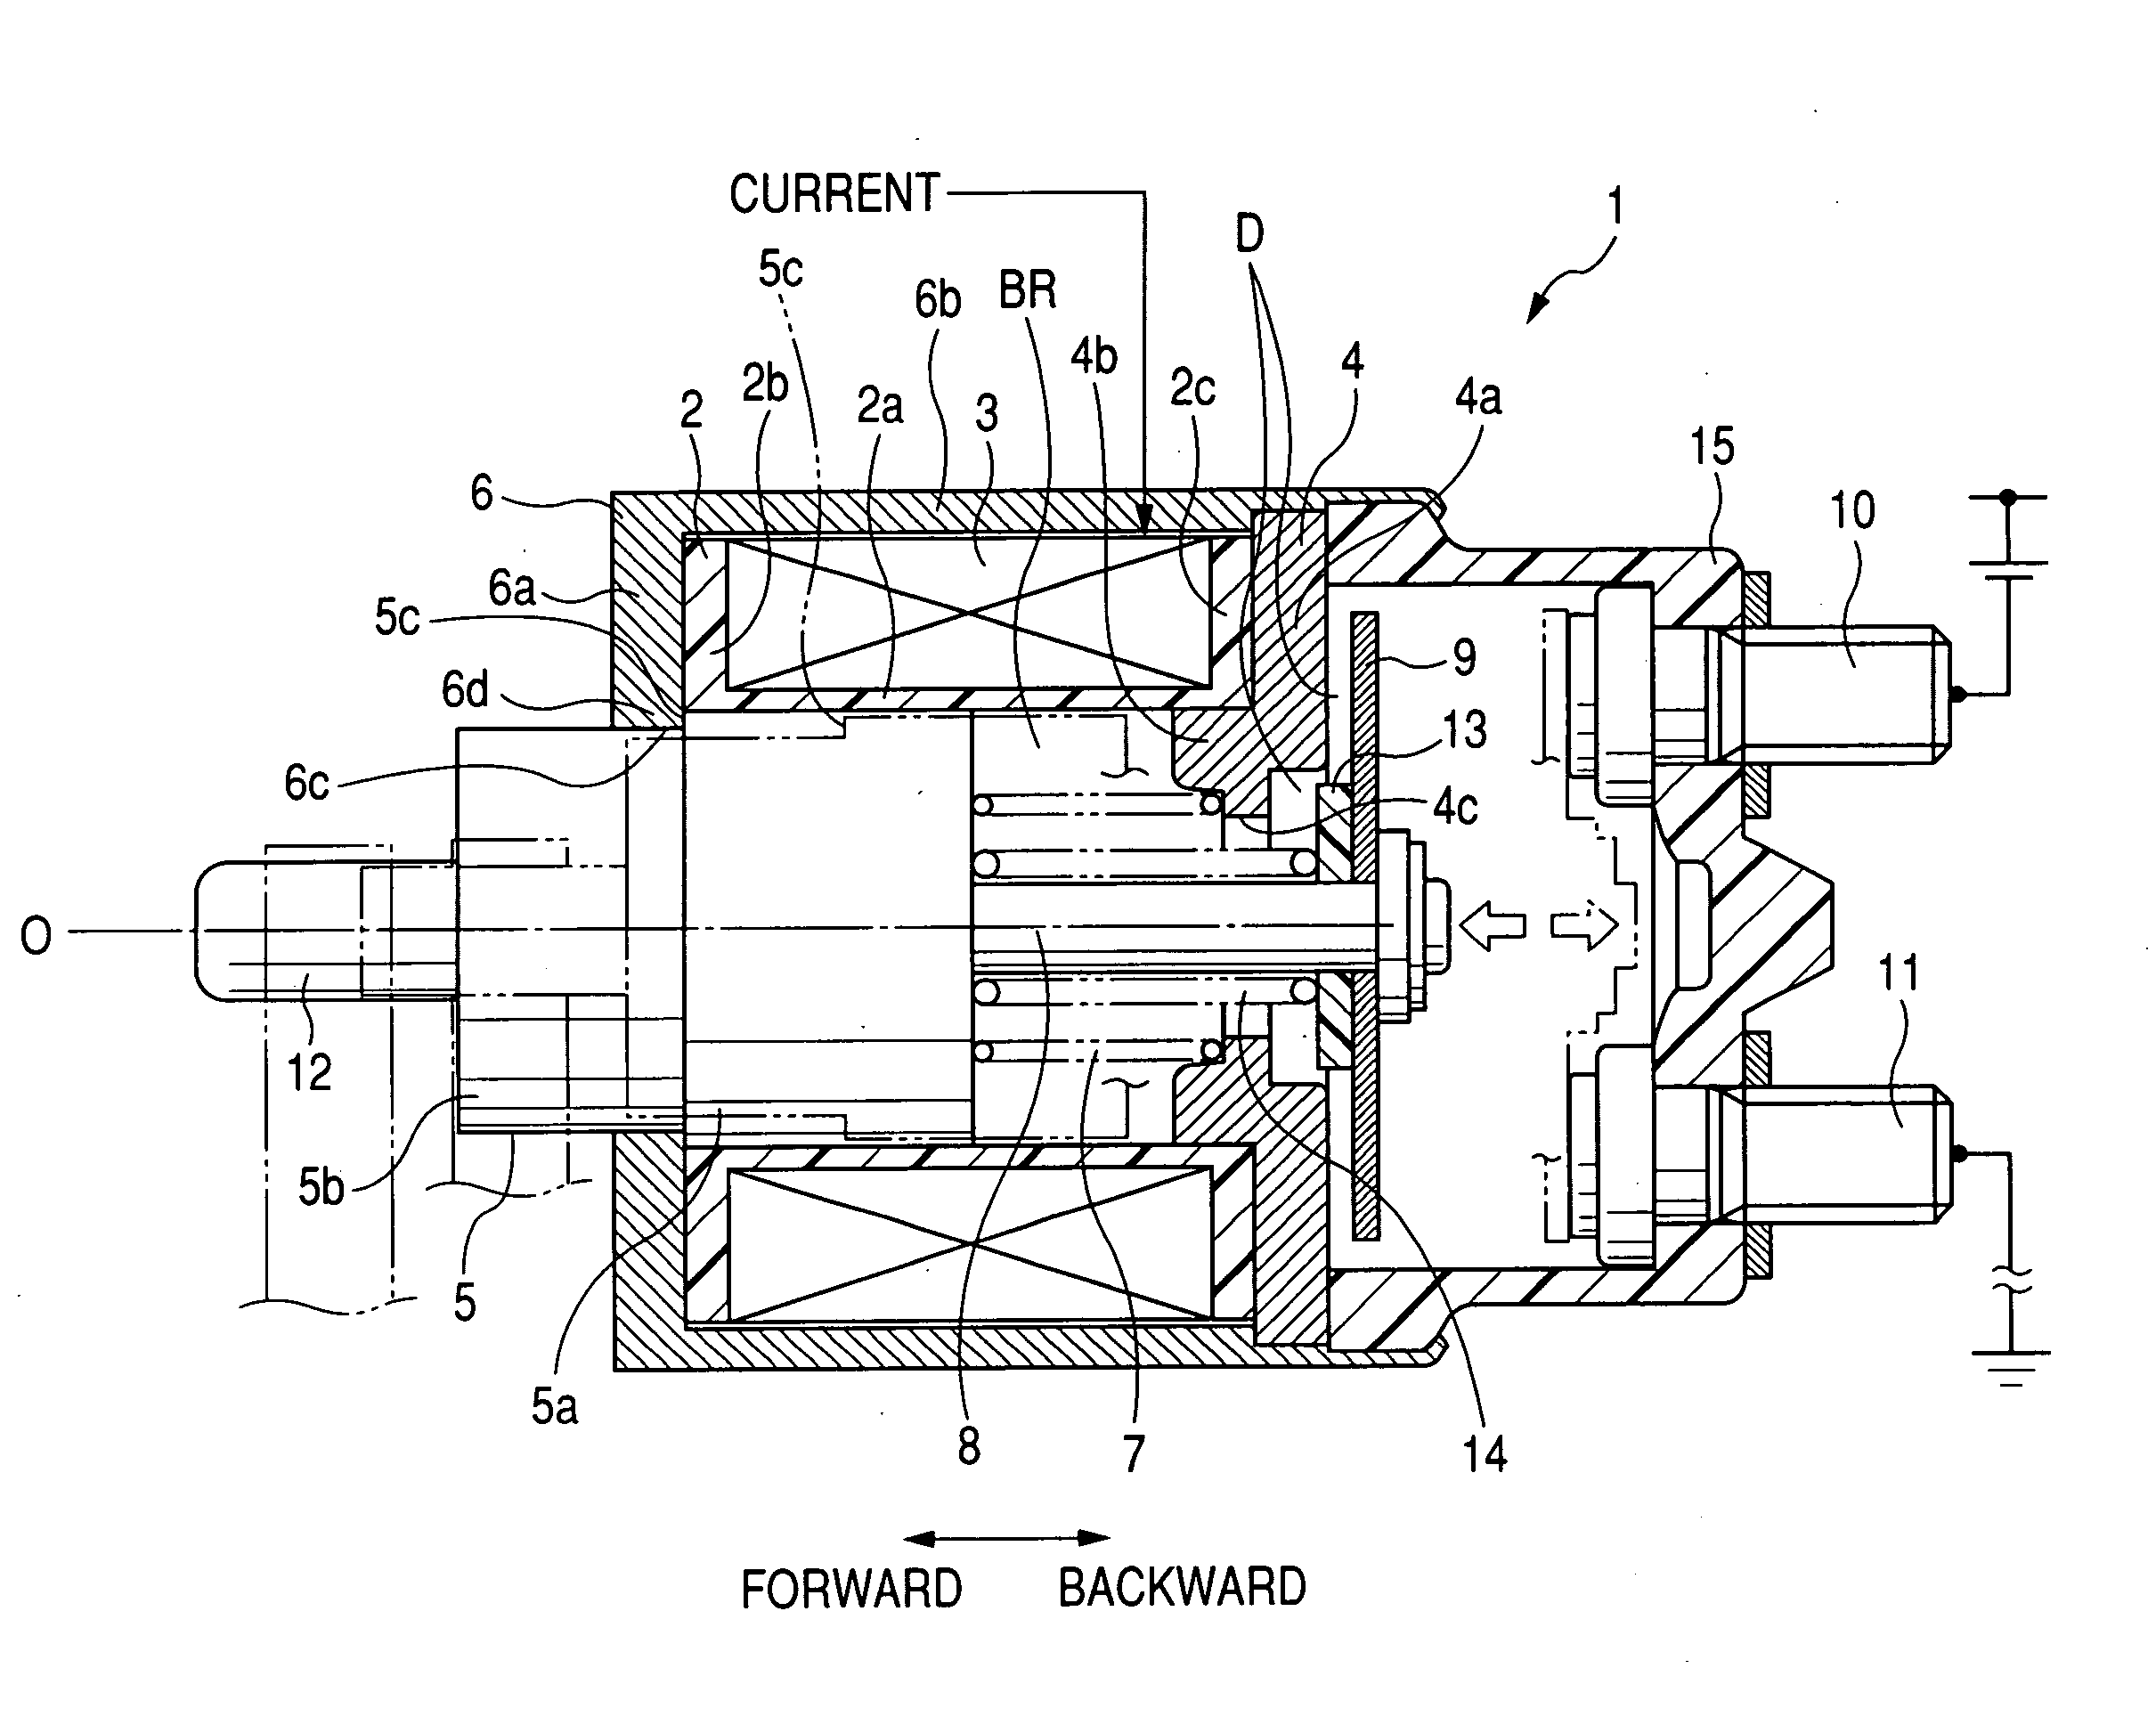 Magnet switch with mechanism for preventing impact force imposed thereon